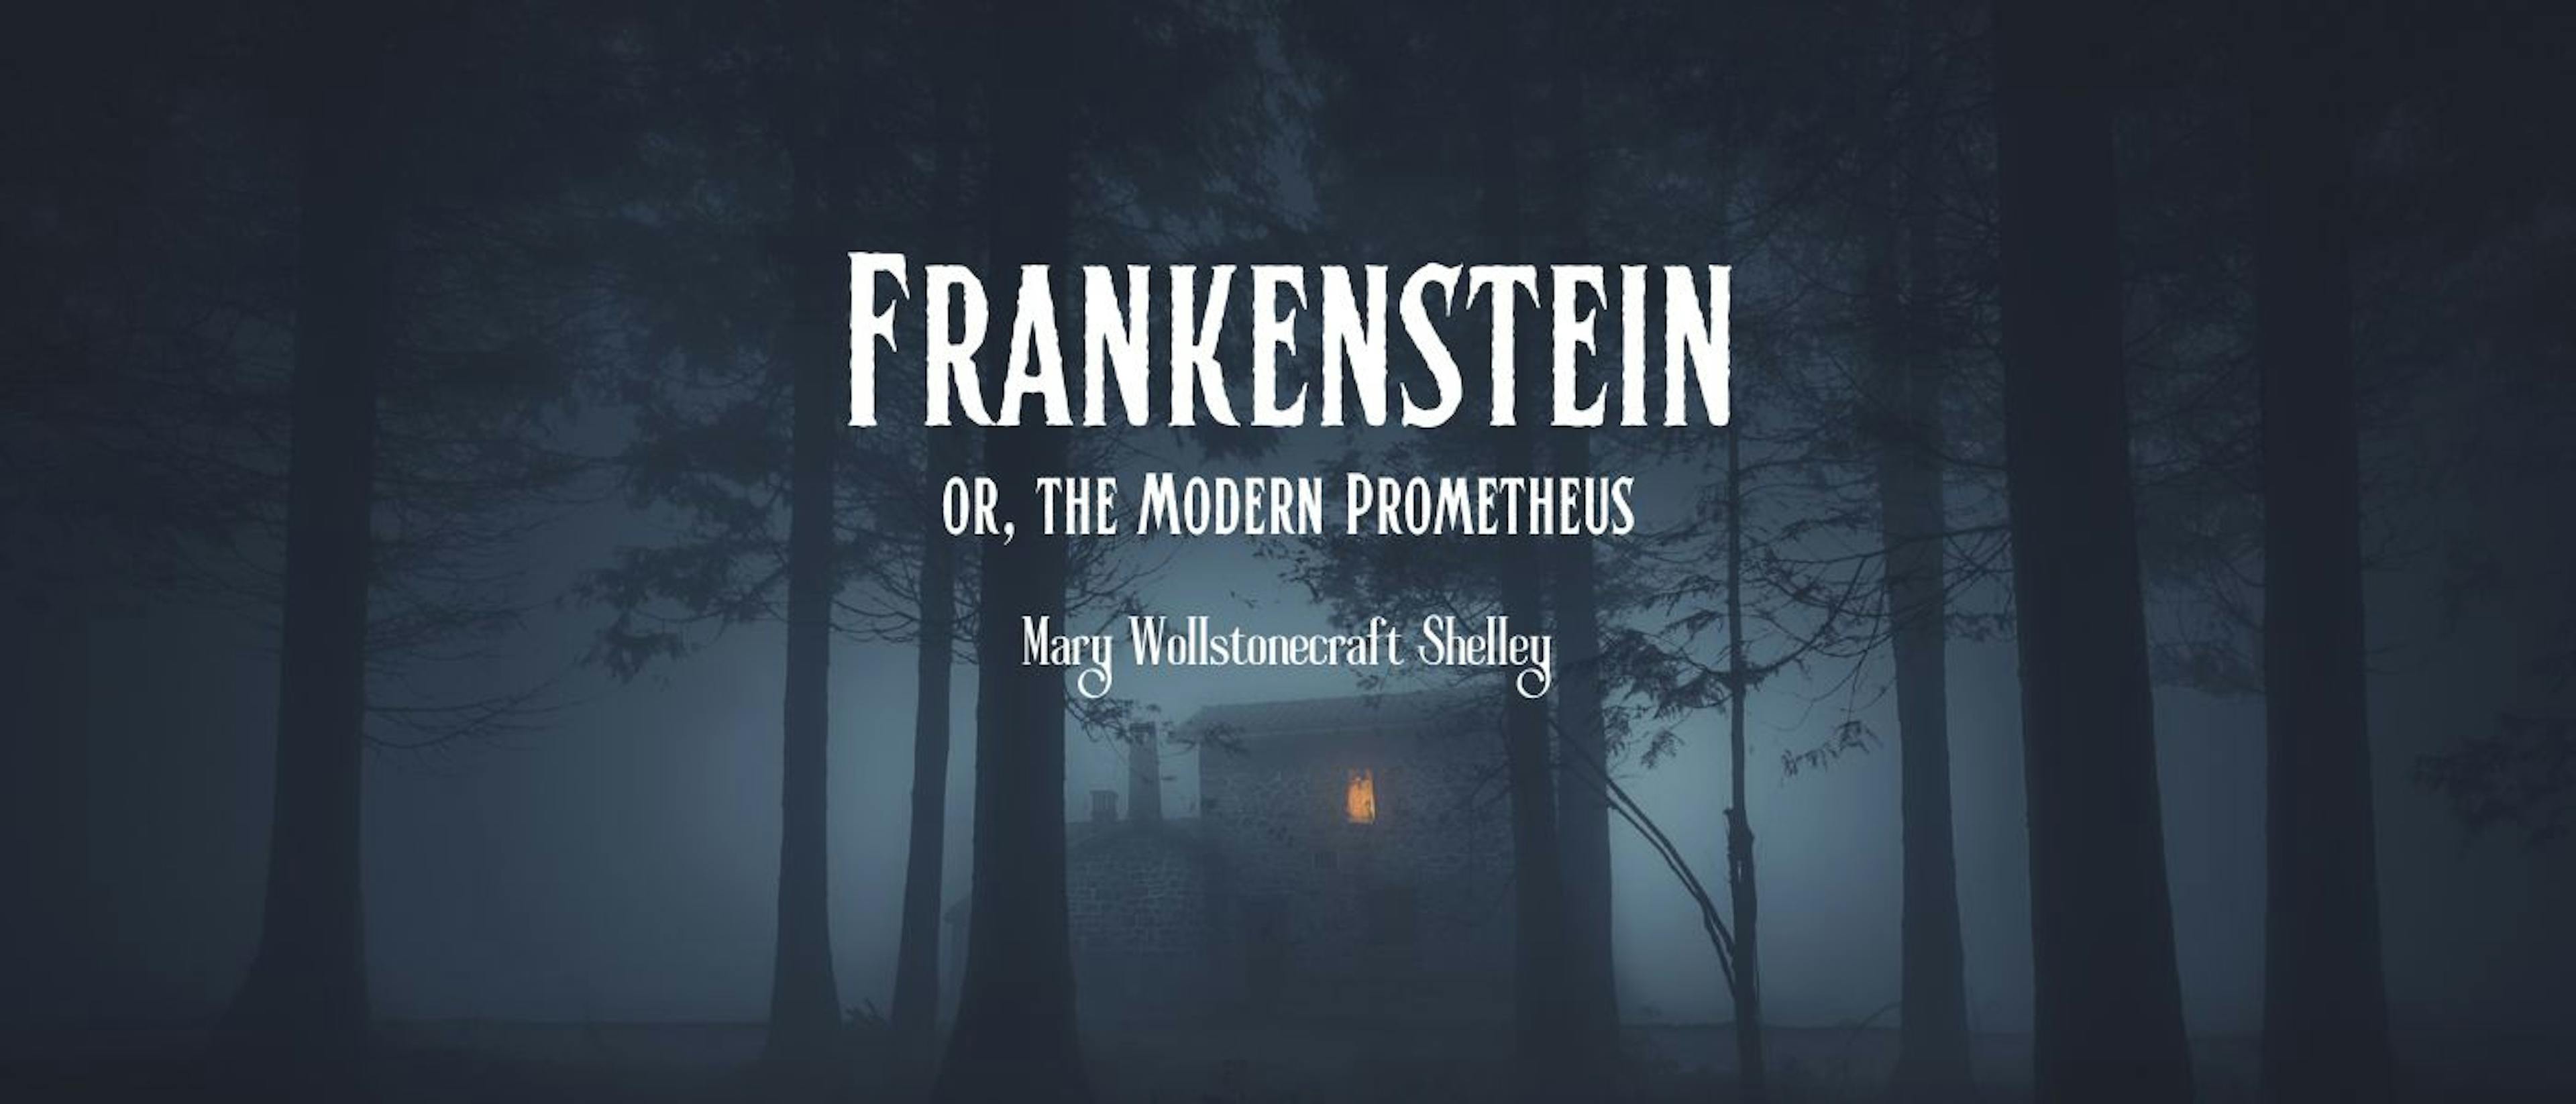 featured image - Frankenstein or, The Modern Prometheus: Chapter VI